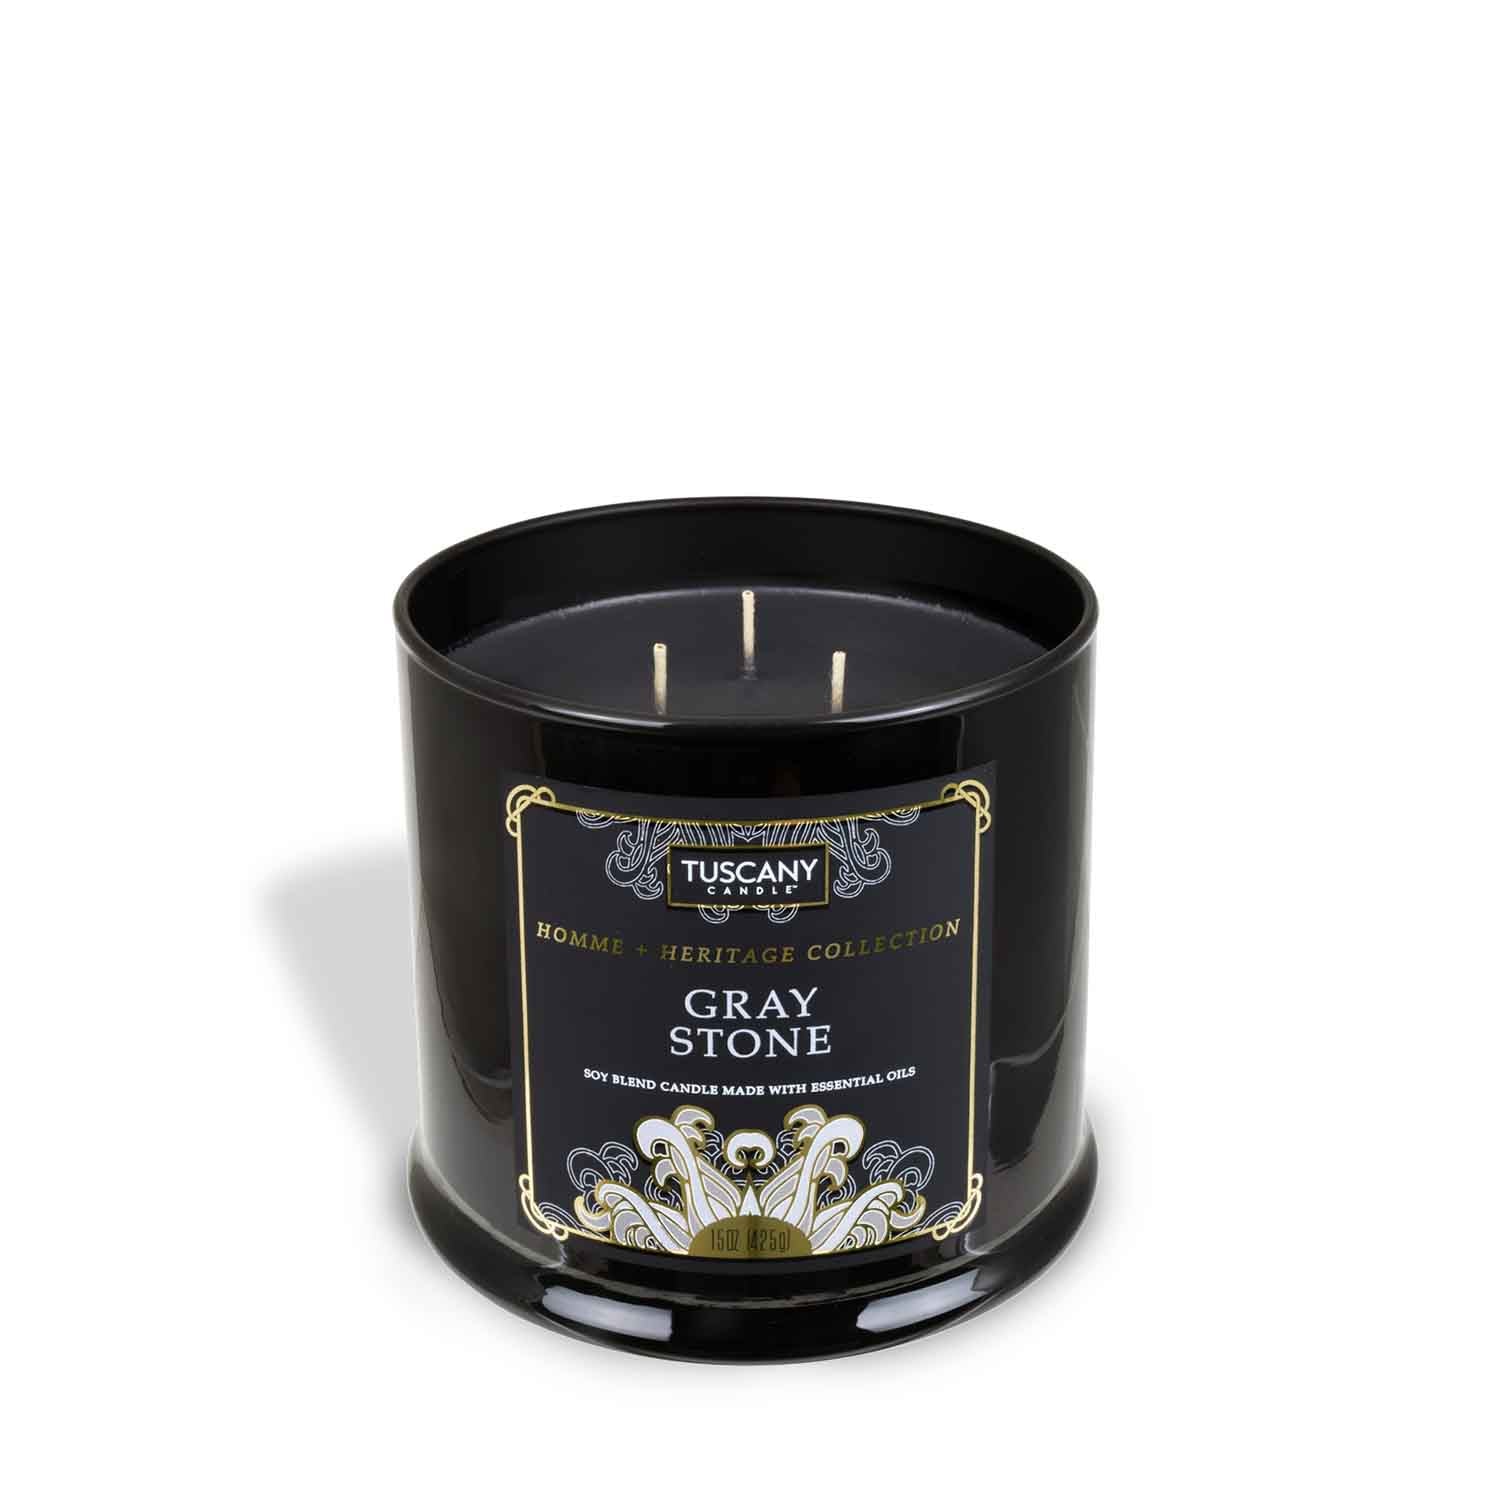 A Gray Stone Scented Jar Candle (15 oz) from the Homme + Heritage collection, crafted with essential oils, showcased in a sleek black tin contrasting against a pristine white background, by Tuscany Candle.